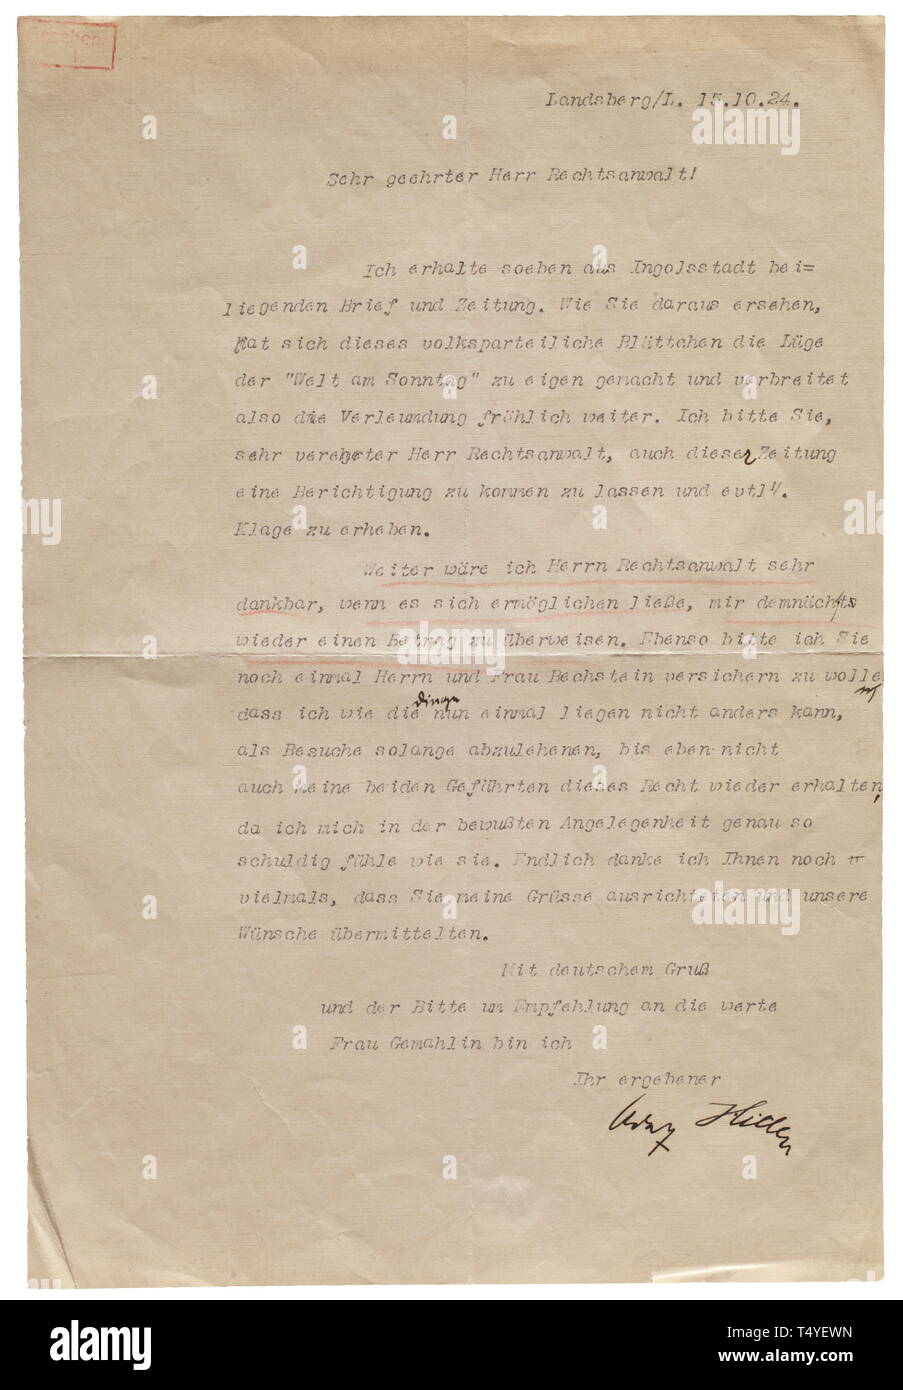 Adolf Hitler - a signed letter from his captivity in Landsberg, dated 15 October 1924. Hitler directs his attorney to defend him against libellous statements made by the newspaper 'Welt am Sonntag'. He also requests a transfer of money and addresses a visitation request of piano maker Bechstein and his wife. Following the failed Putsch attempt in 1923 Hitler was incarcerated in the fortress of Landsberg. He was released on 20 December 1924. historic, historical, 20th century, 1930s, NS, National Socialism, Nazism, Third Reich, German Reich, Germany, German, National Sociali, Editorial-Use-Only Stock Photo